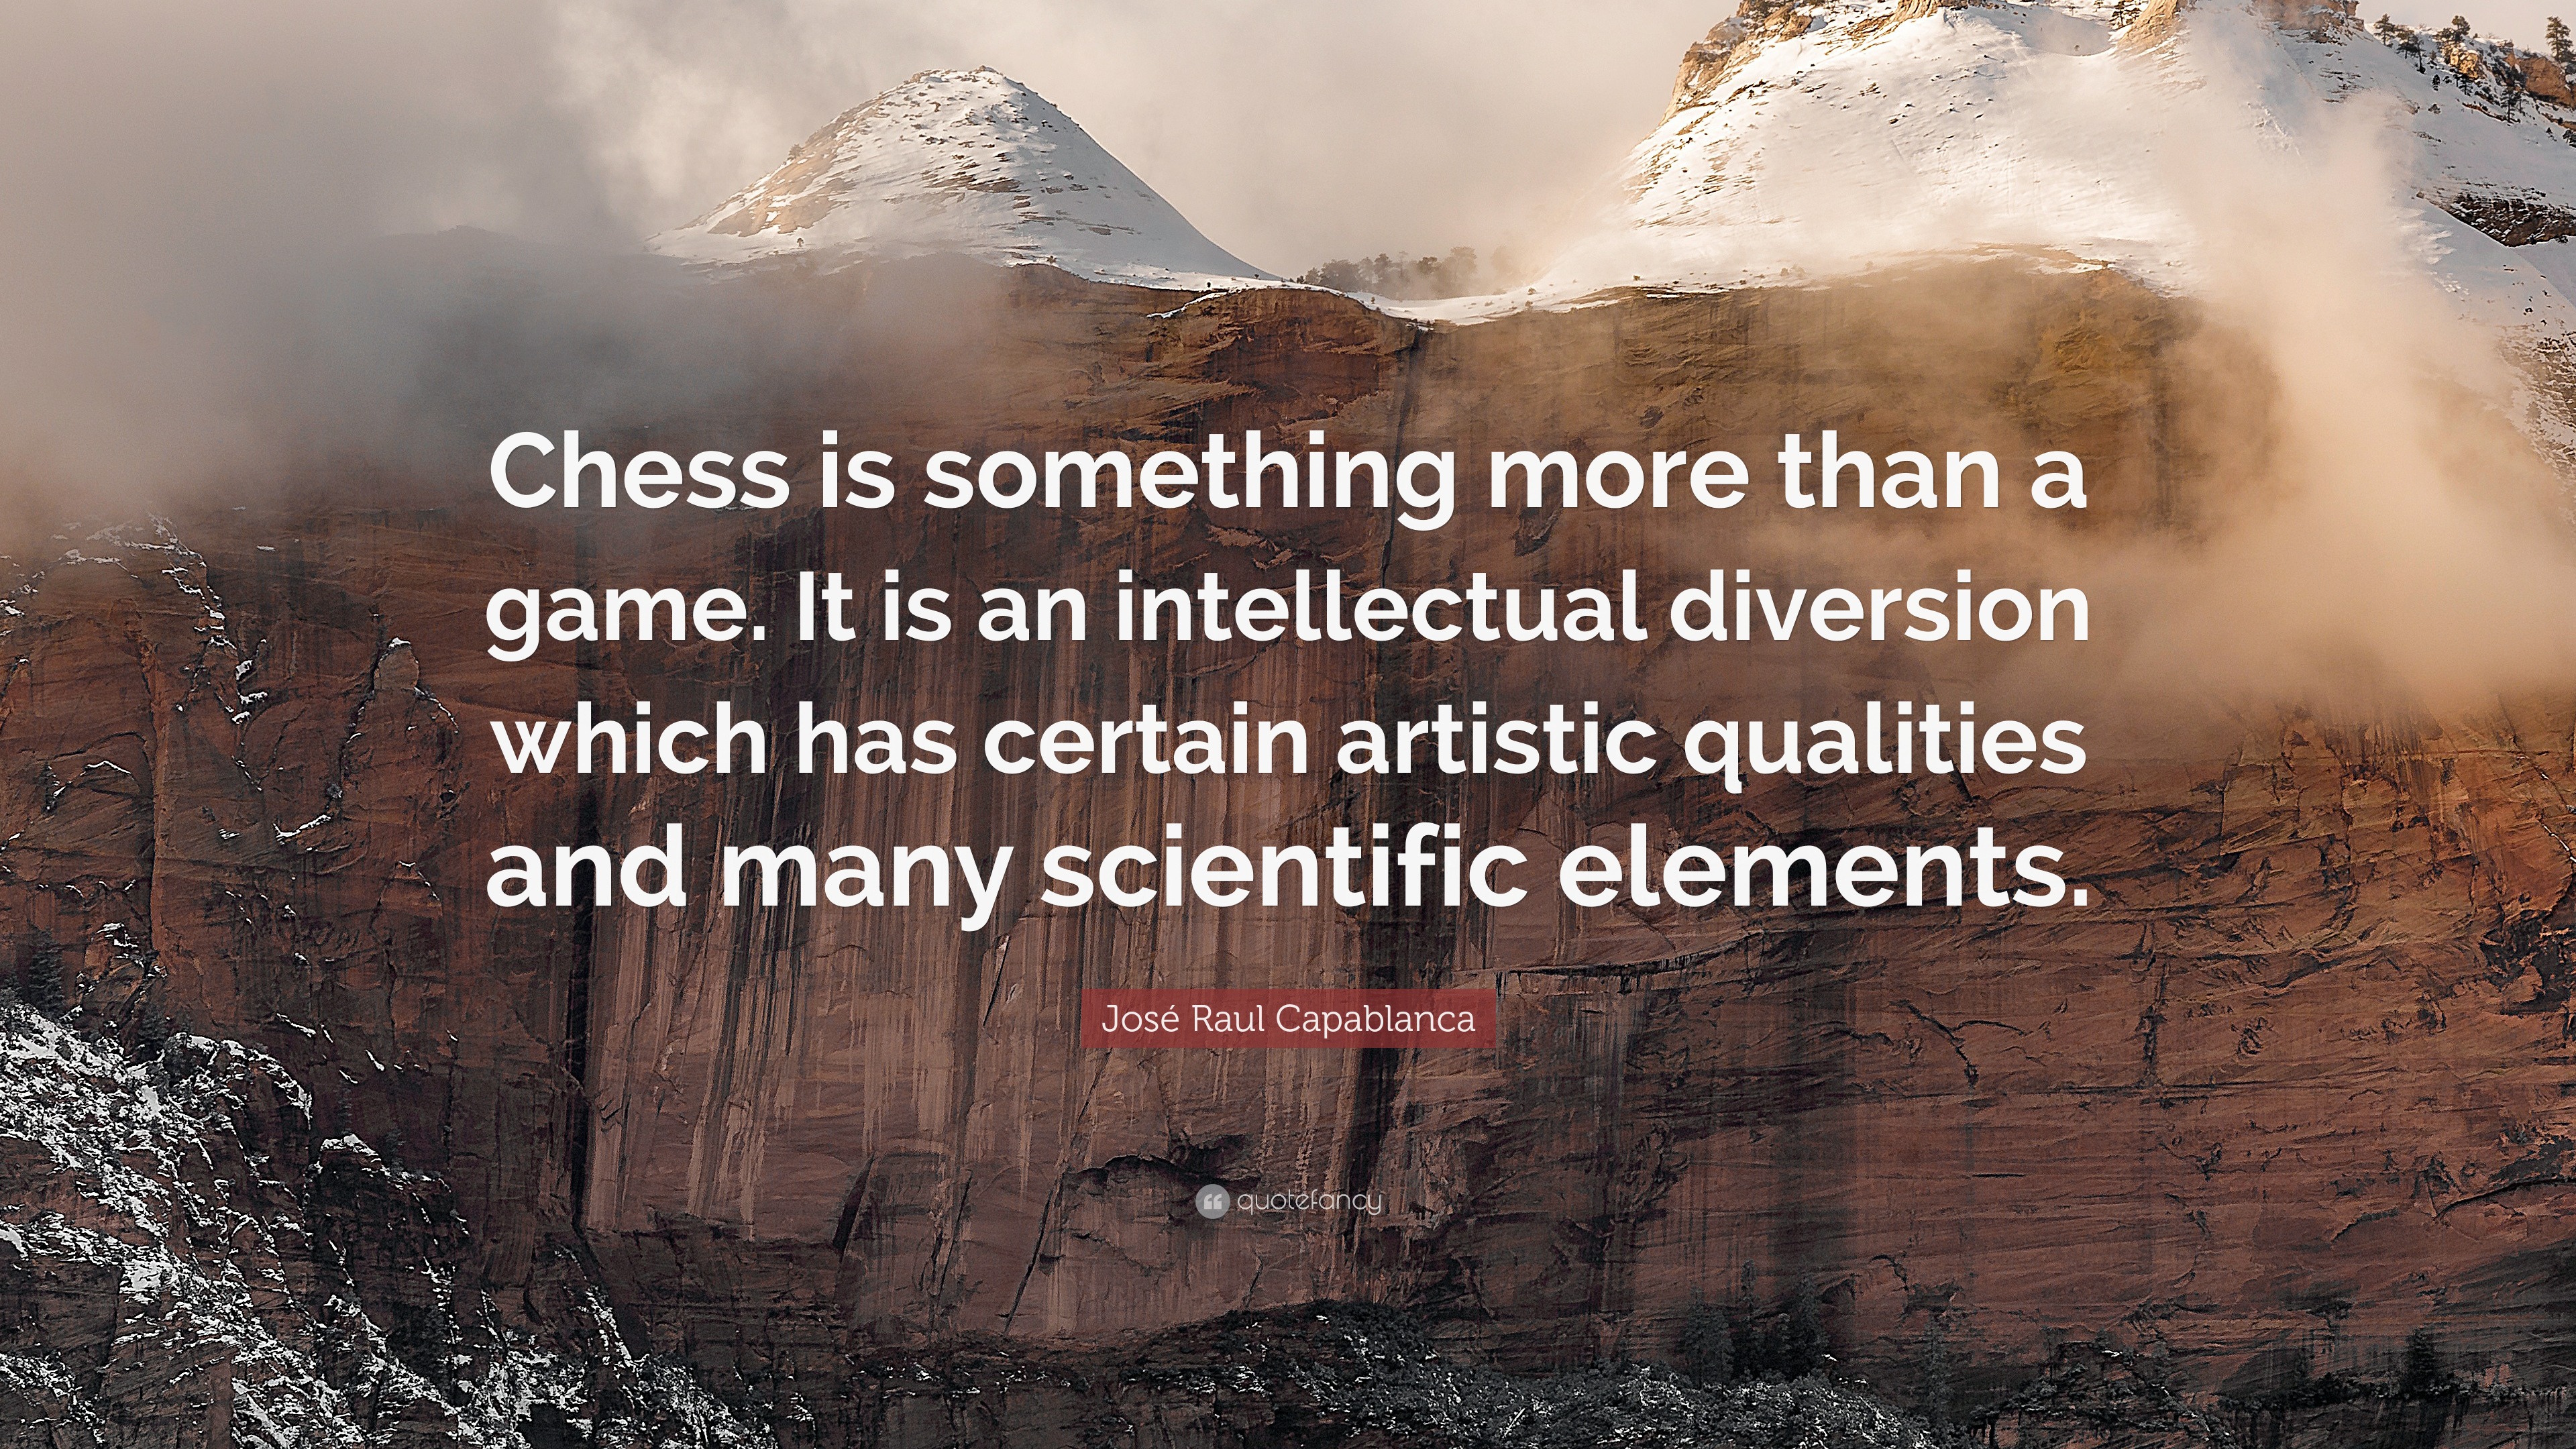 Chess Quotes - 27 quotes on Chess Science Quotes - Dictionary of Science  Quotations and Scientist Quotes